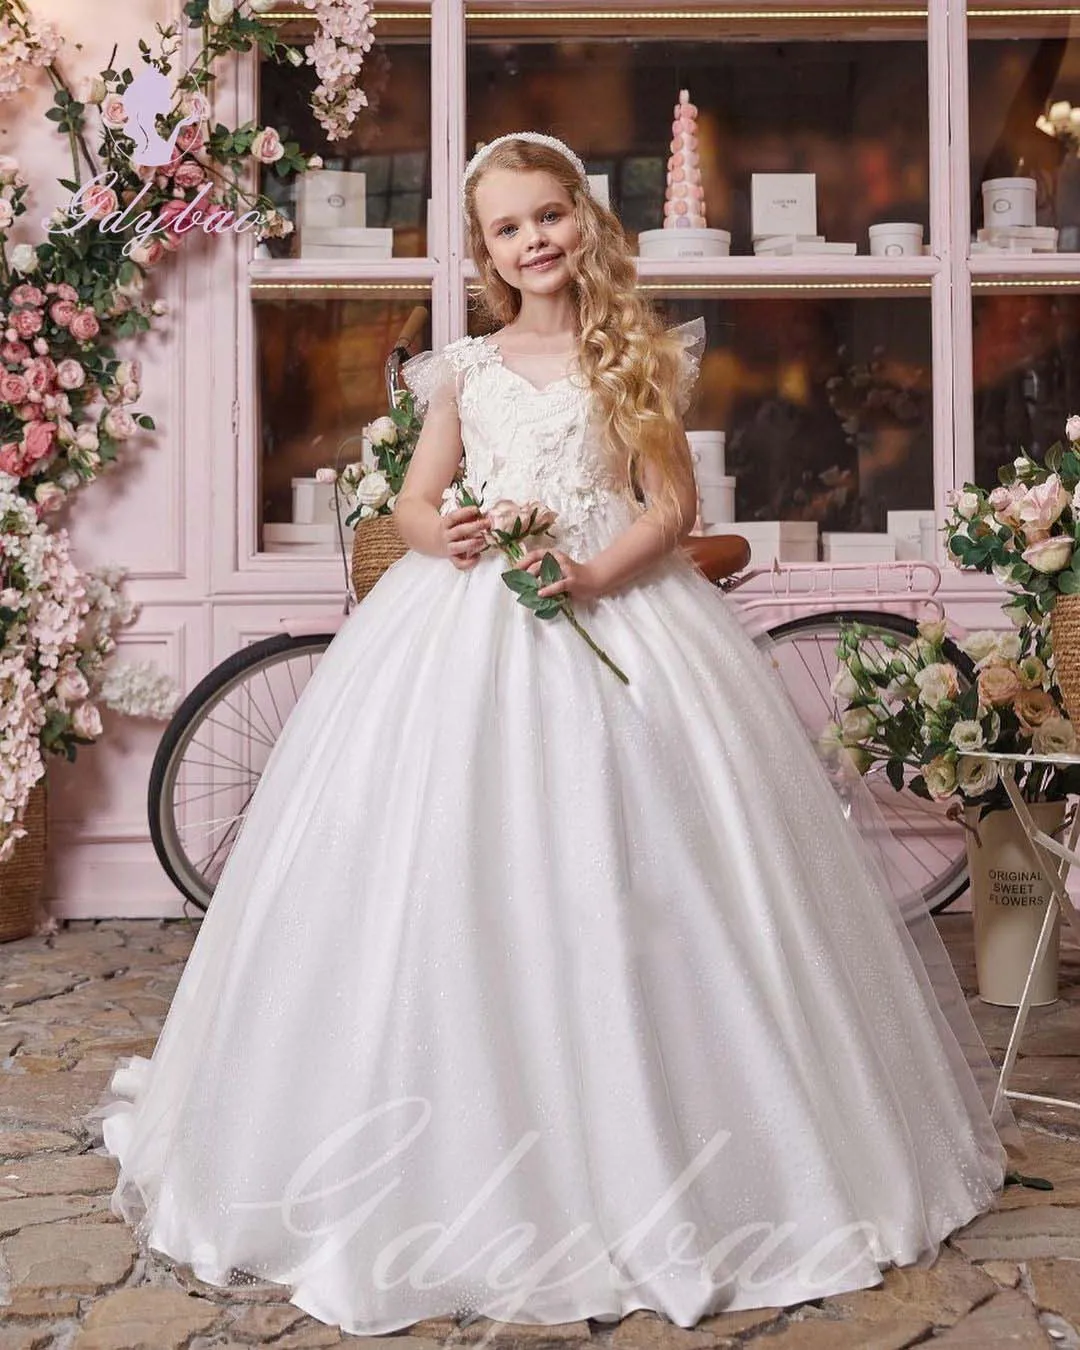 

White Satin Flower Girl Dress for Wedding Applique V-back Floor Length Kids First Communion Pageant Party Birthday Ball Gown